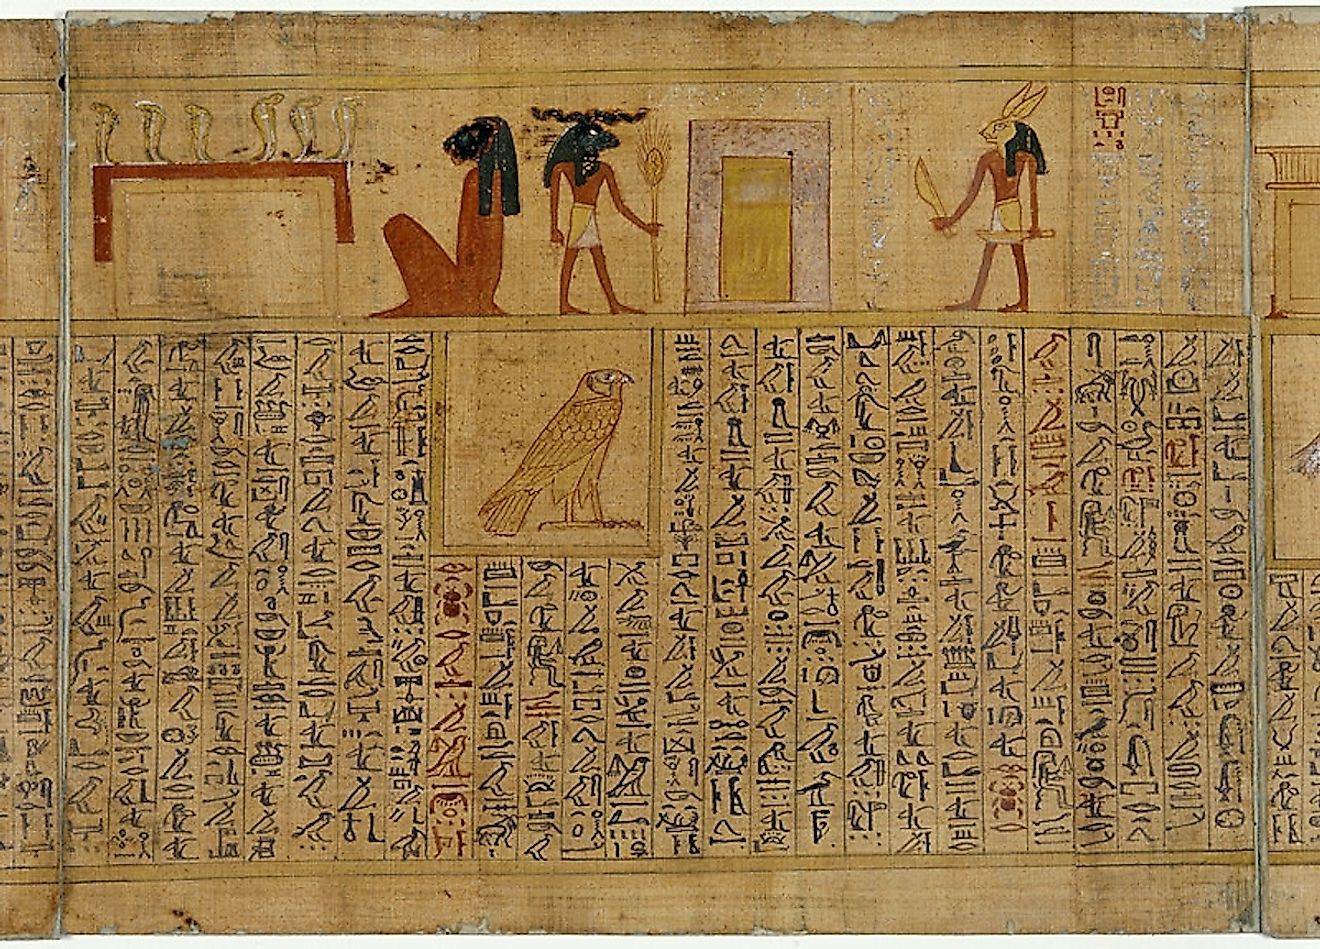 The Edwin Smith papyrus, the world's oldest surviving surgical document. Written in hieratic script in ancient Egypt around 1600 B.C. Image credit: Jeff Dahl/Public domain